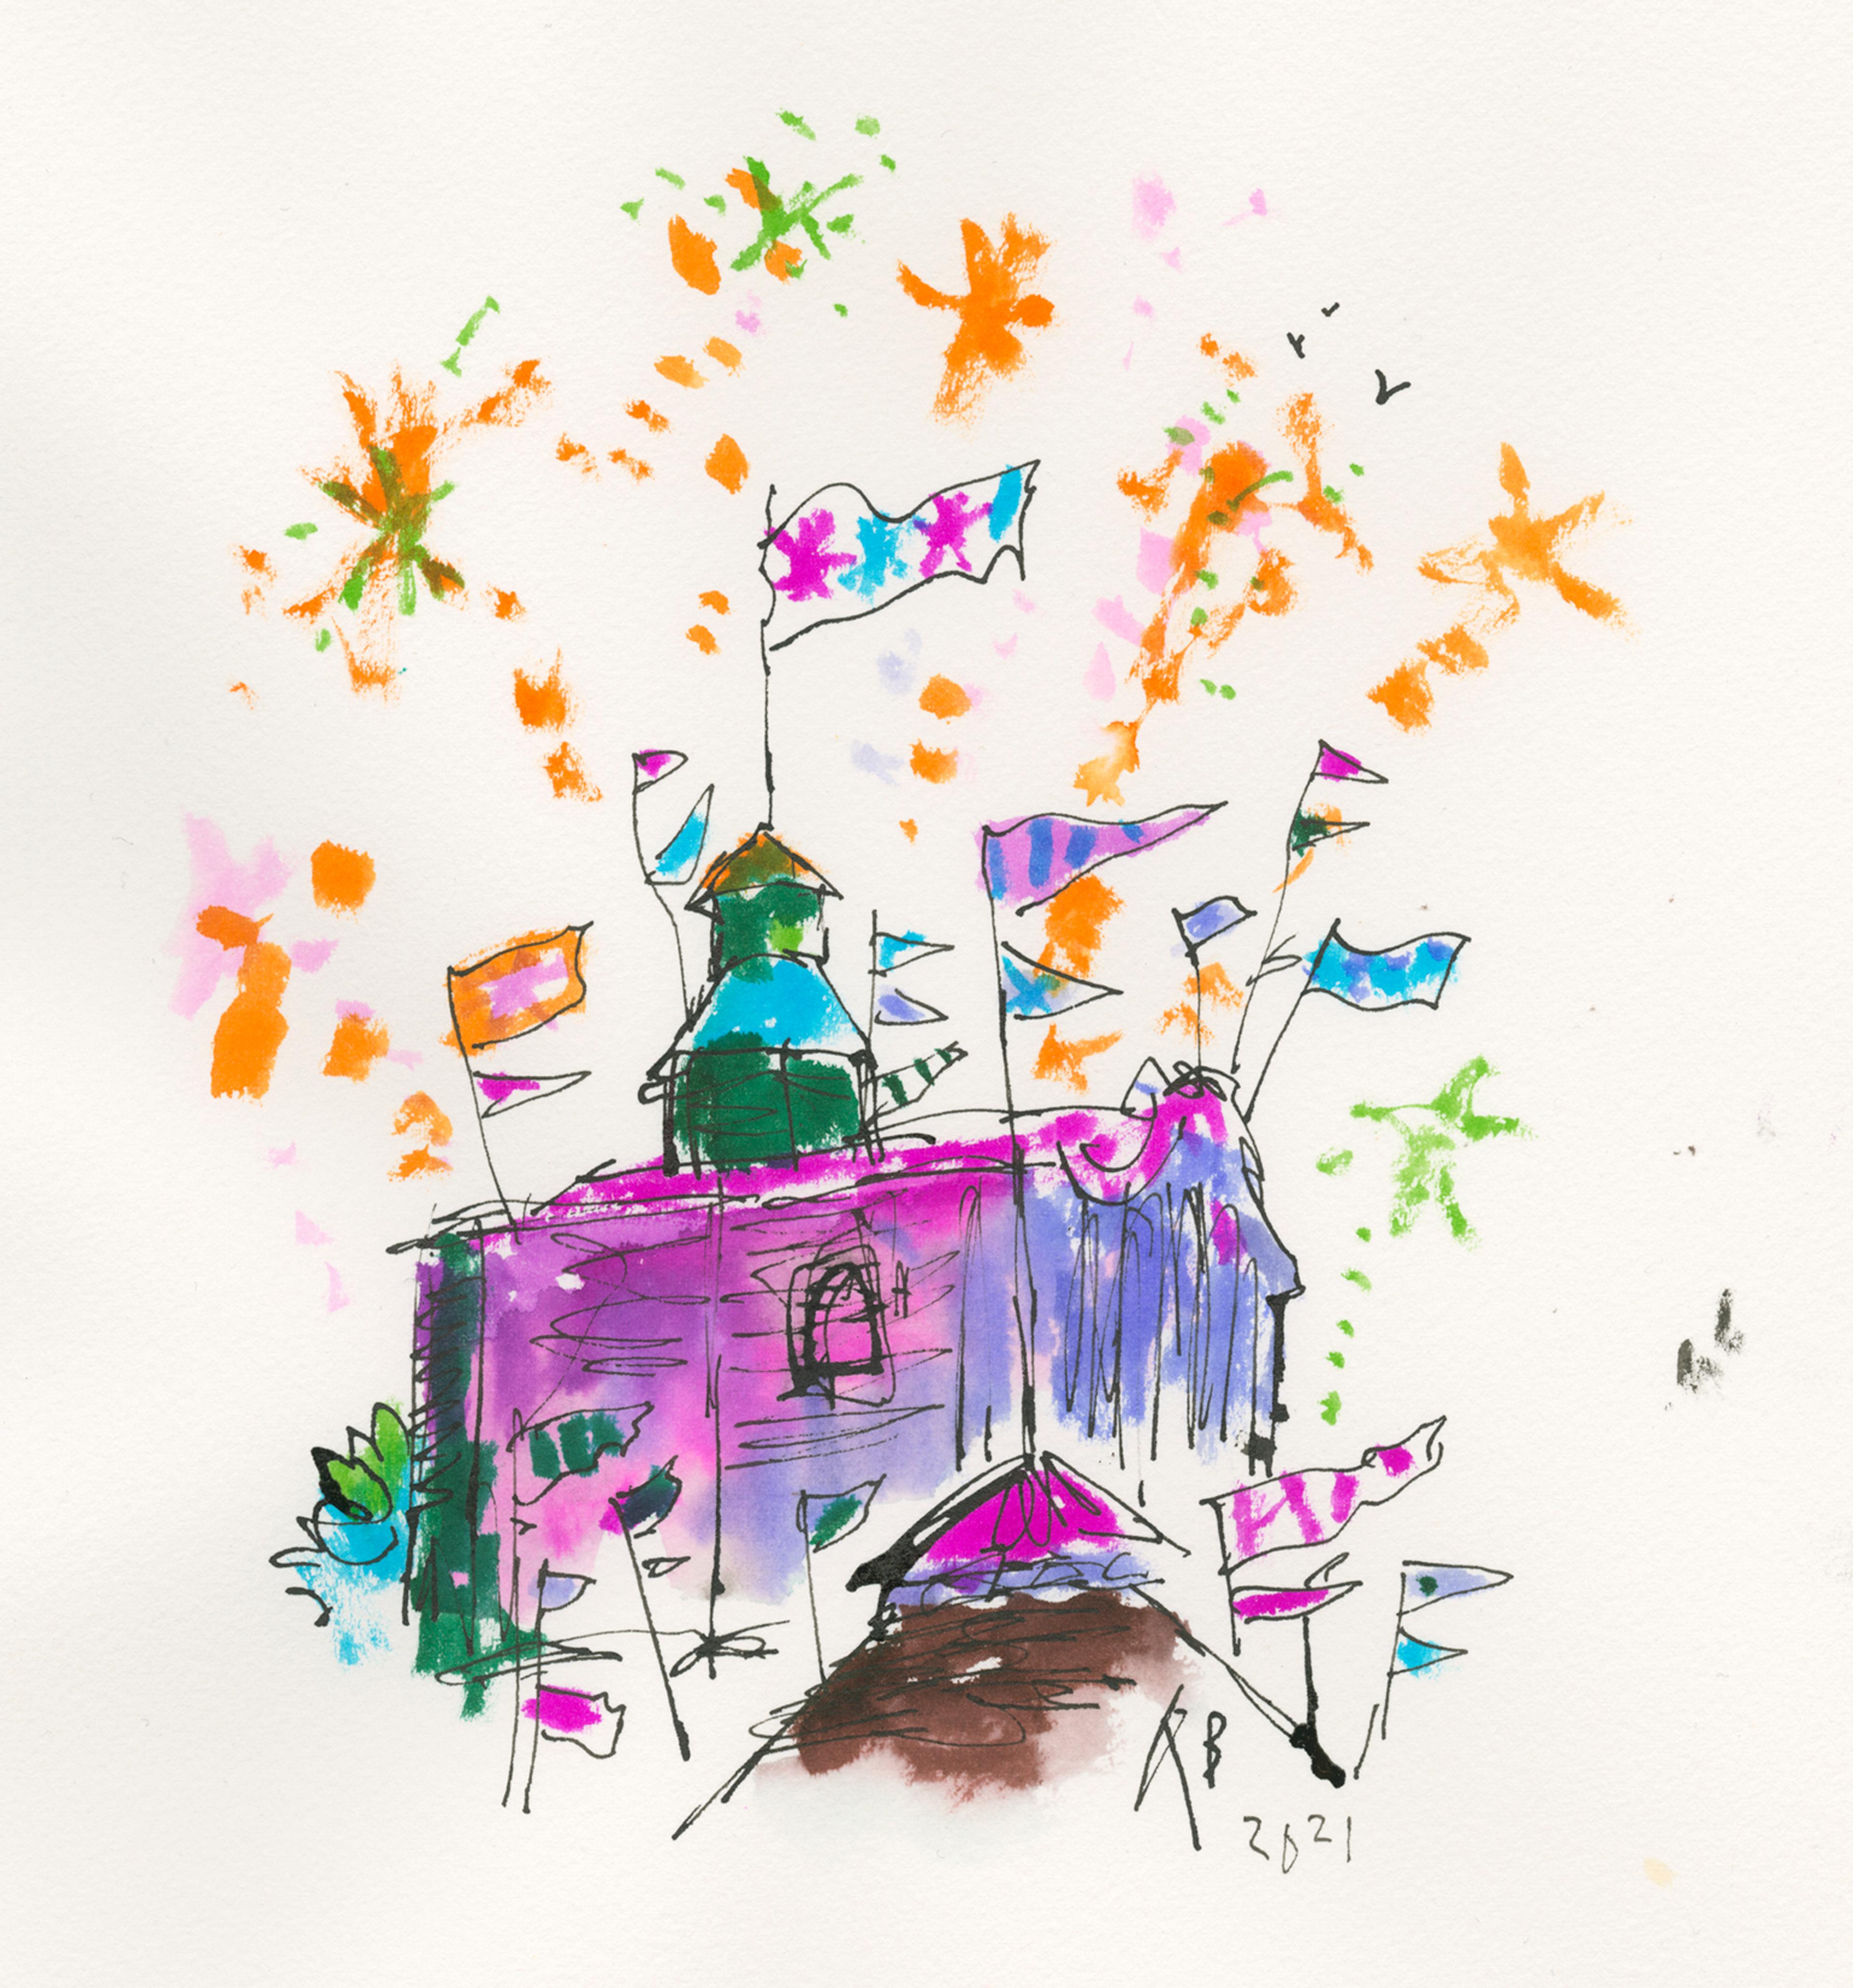 Quentin Blake illustration of New River Head with flags coming out from the buildings and fireworks going off in the background.